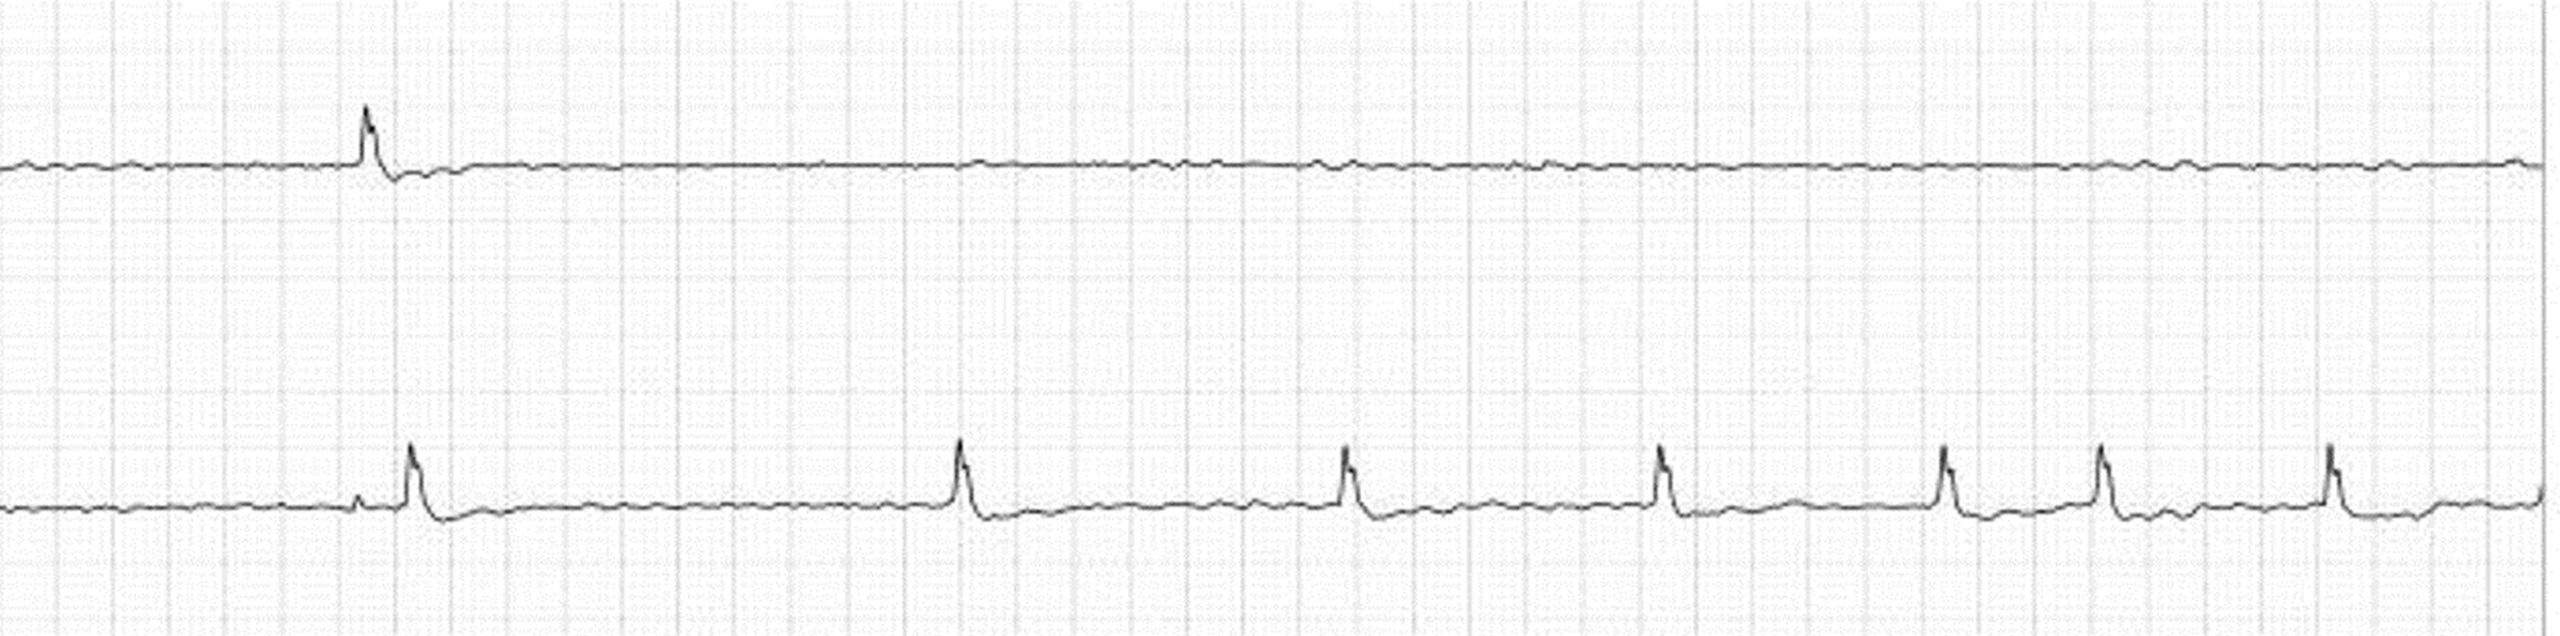 Long pause on ECG due to sick sinus syndrome